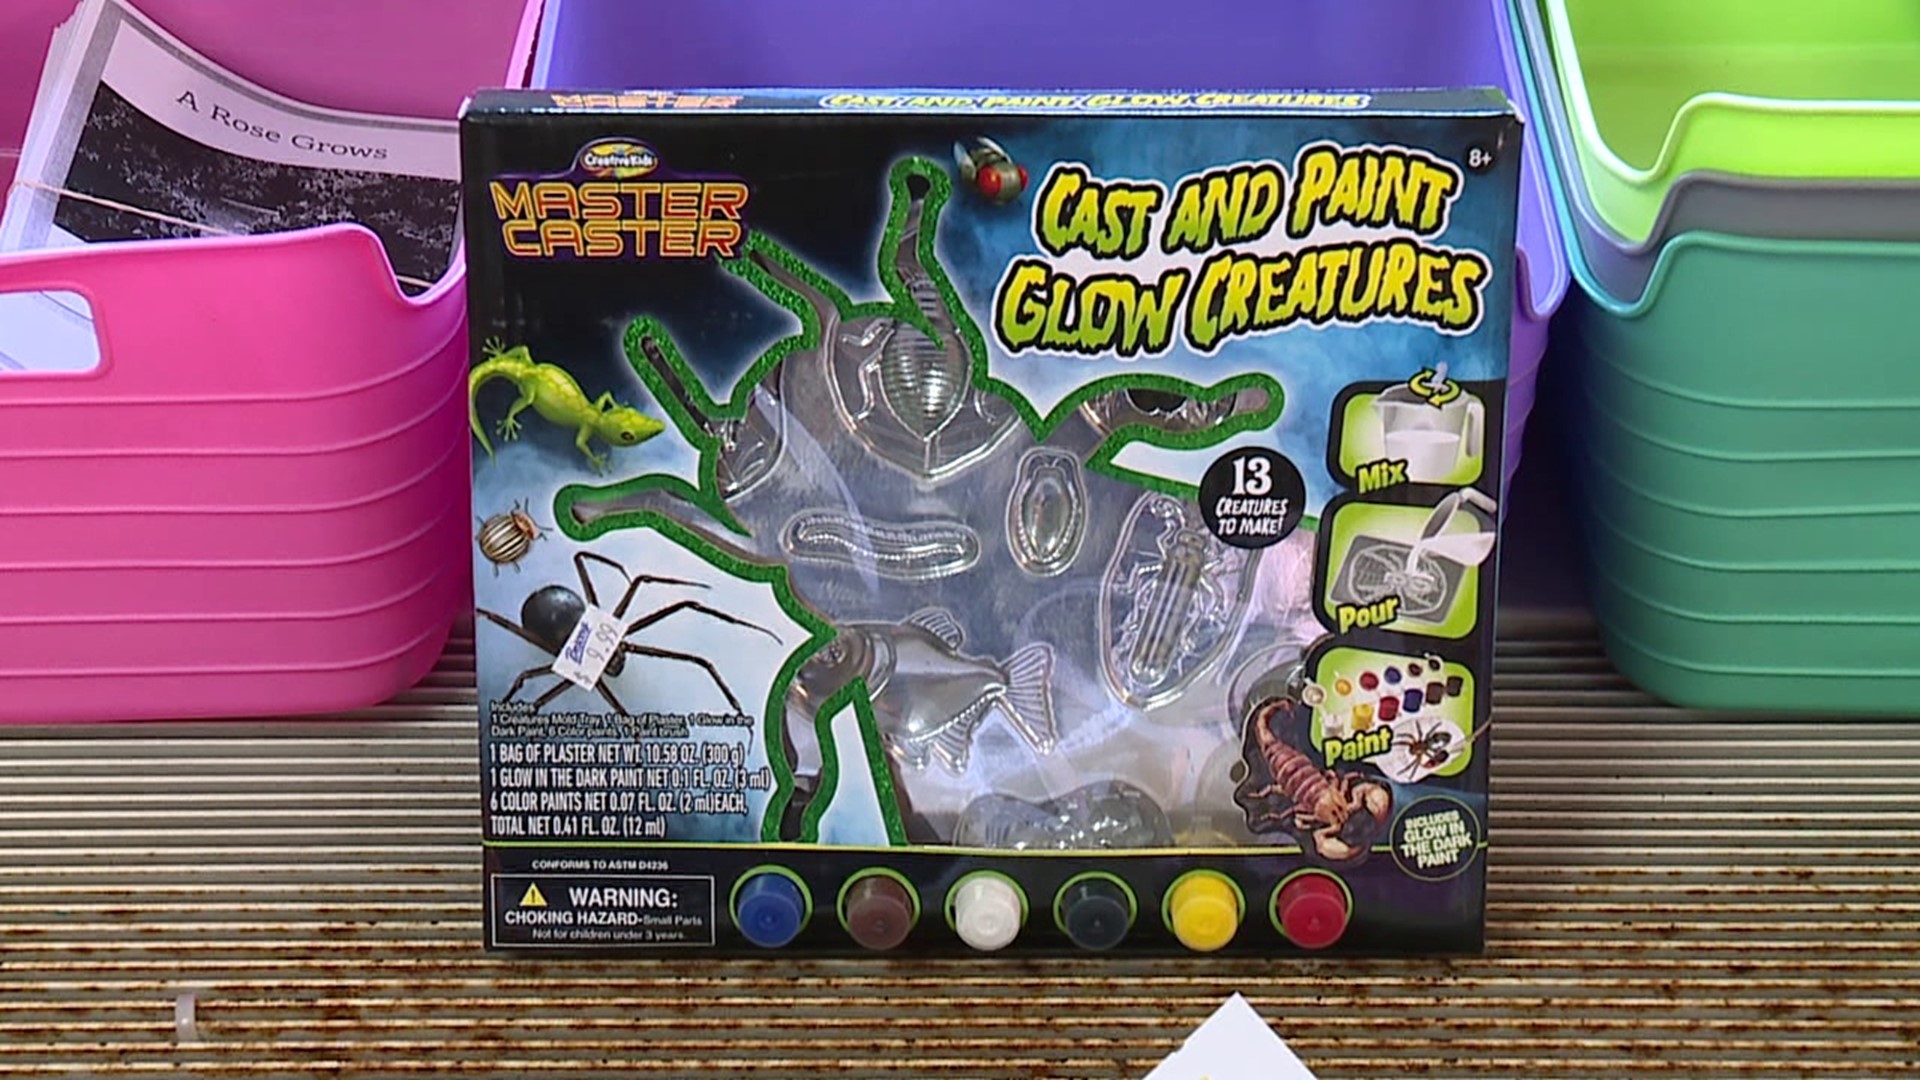 It's a project that promises hours of fun. It's called the "Master Caster," and it allows kids to create lots of bugs, but does it really work?